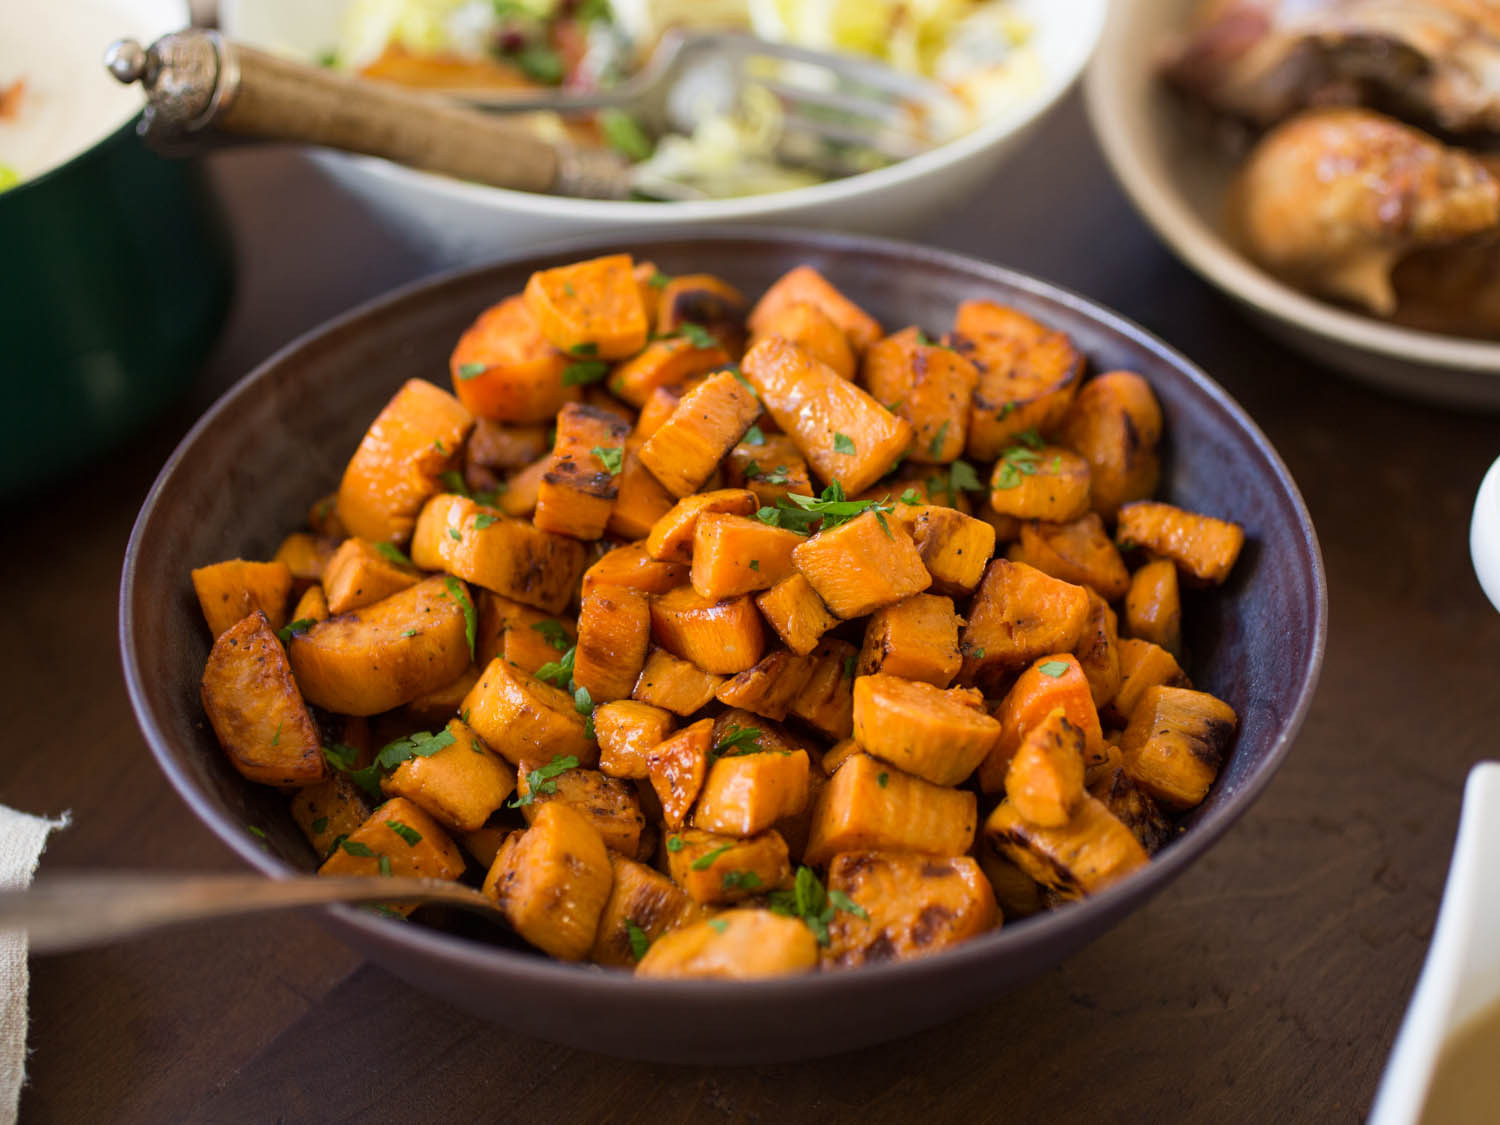 Best Recipe For Thanksgiving
 8 Not Too Sweet Sweet Potato Recipes for Thanksgiving